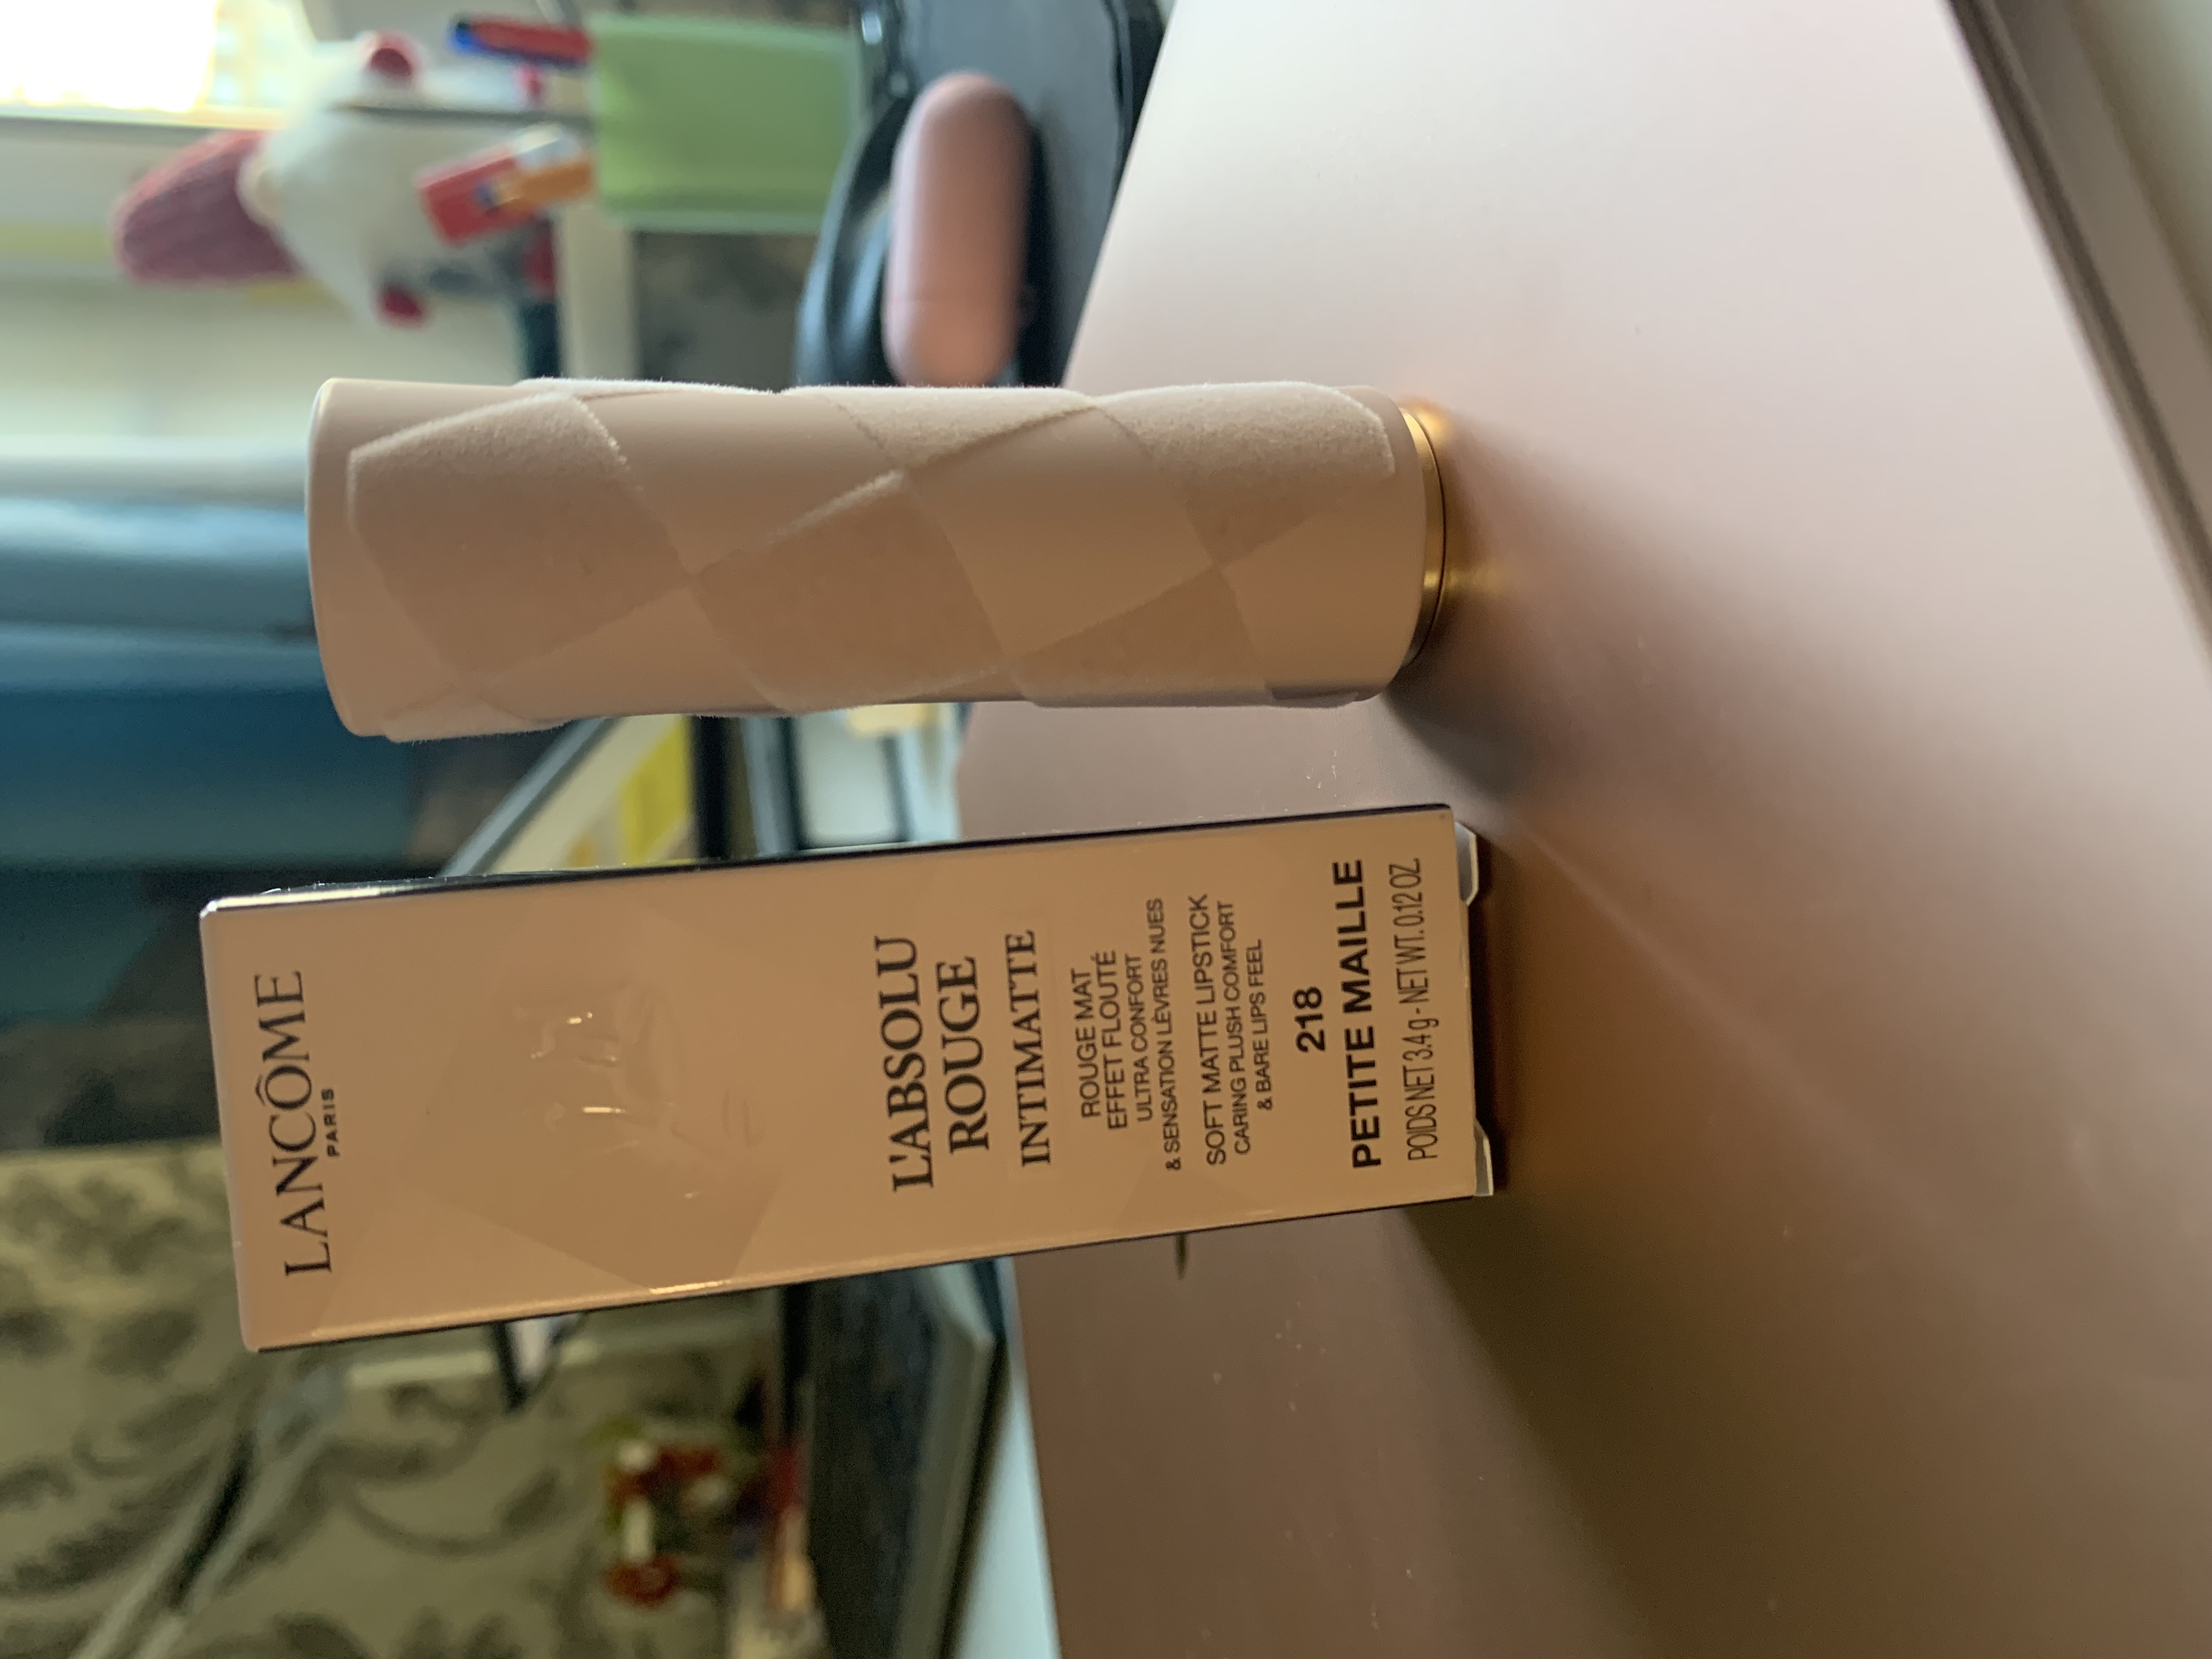 Lancome L'absolu Rouge Intimatte (New), 218